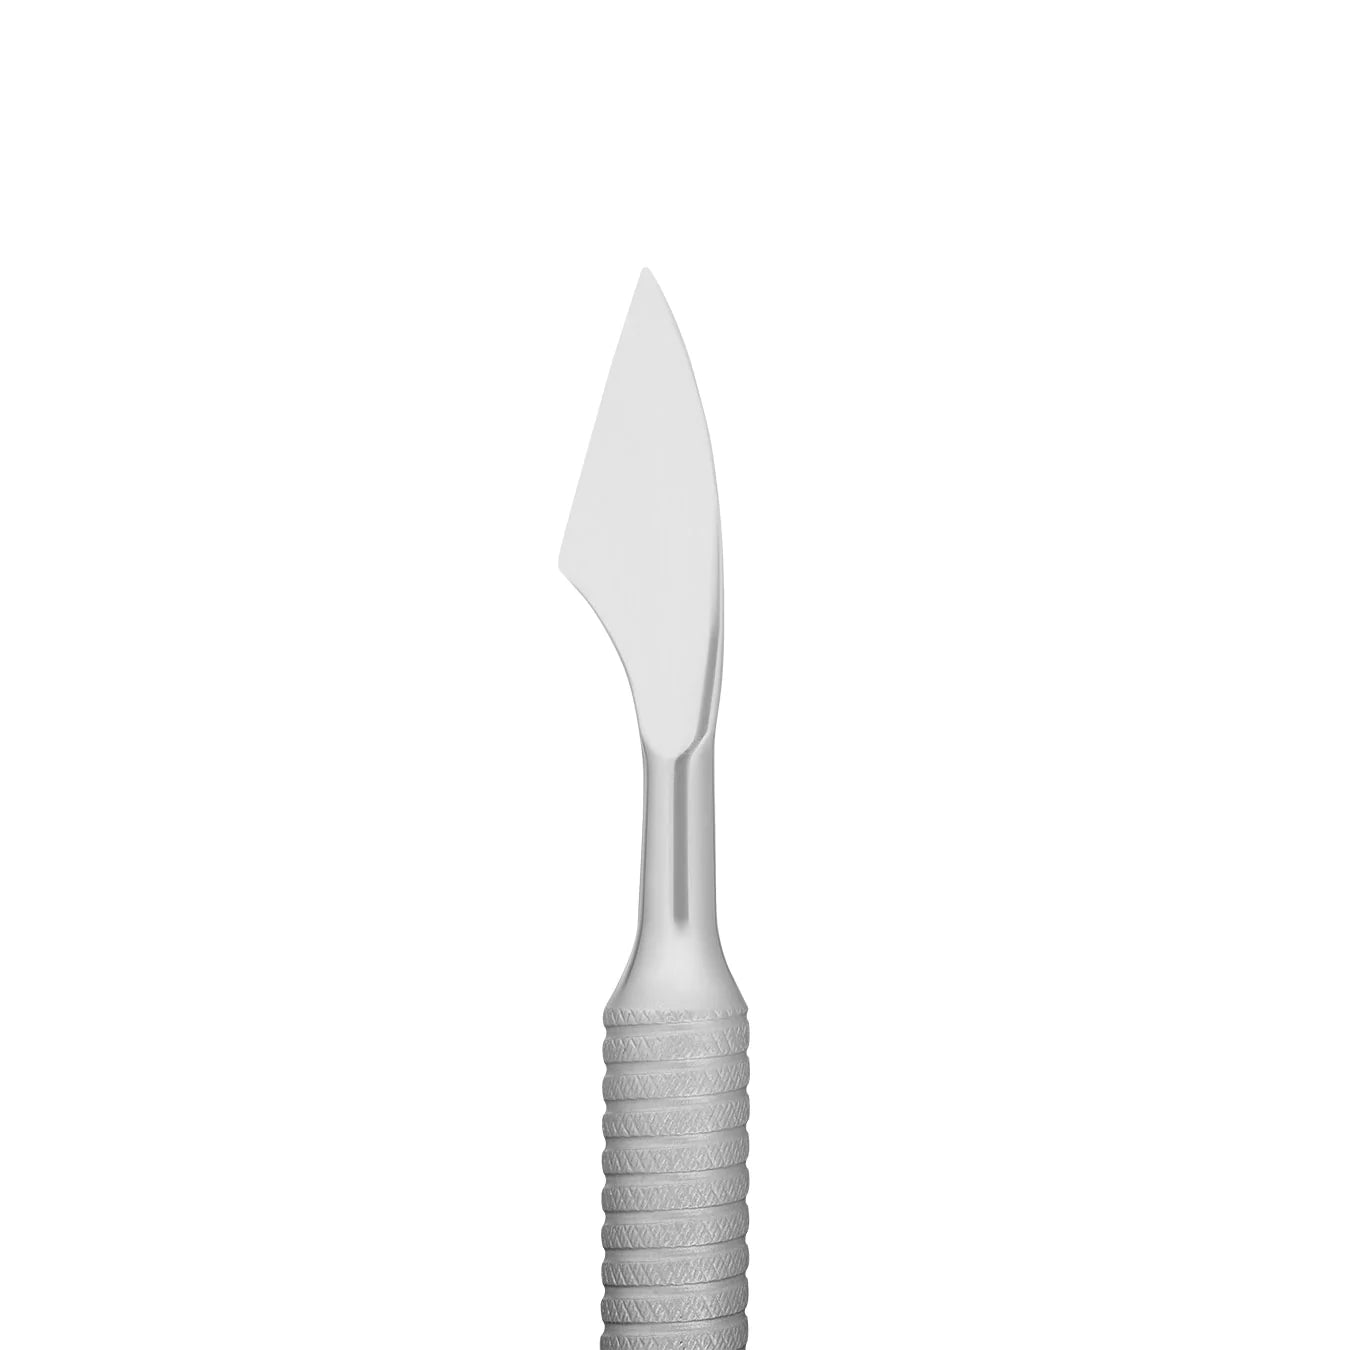 STALEKS PRO SMART 50 TYPE 2 CUTICLE PUSHER ROUNDED PUSHER AND CLEANER PS-50/2